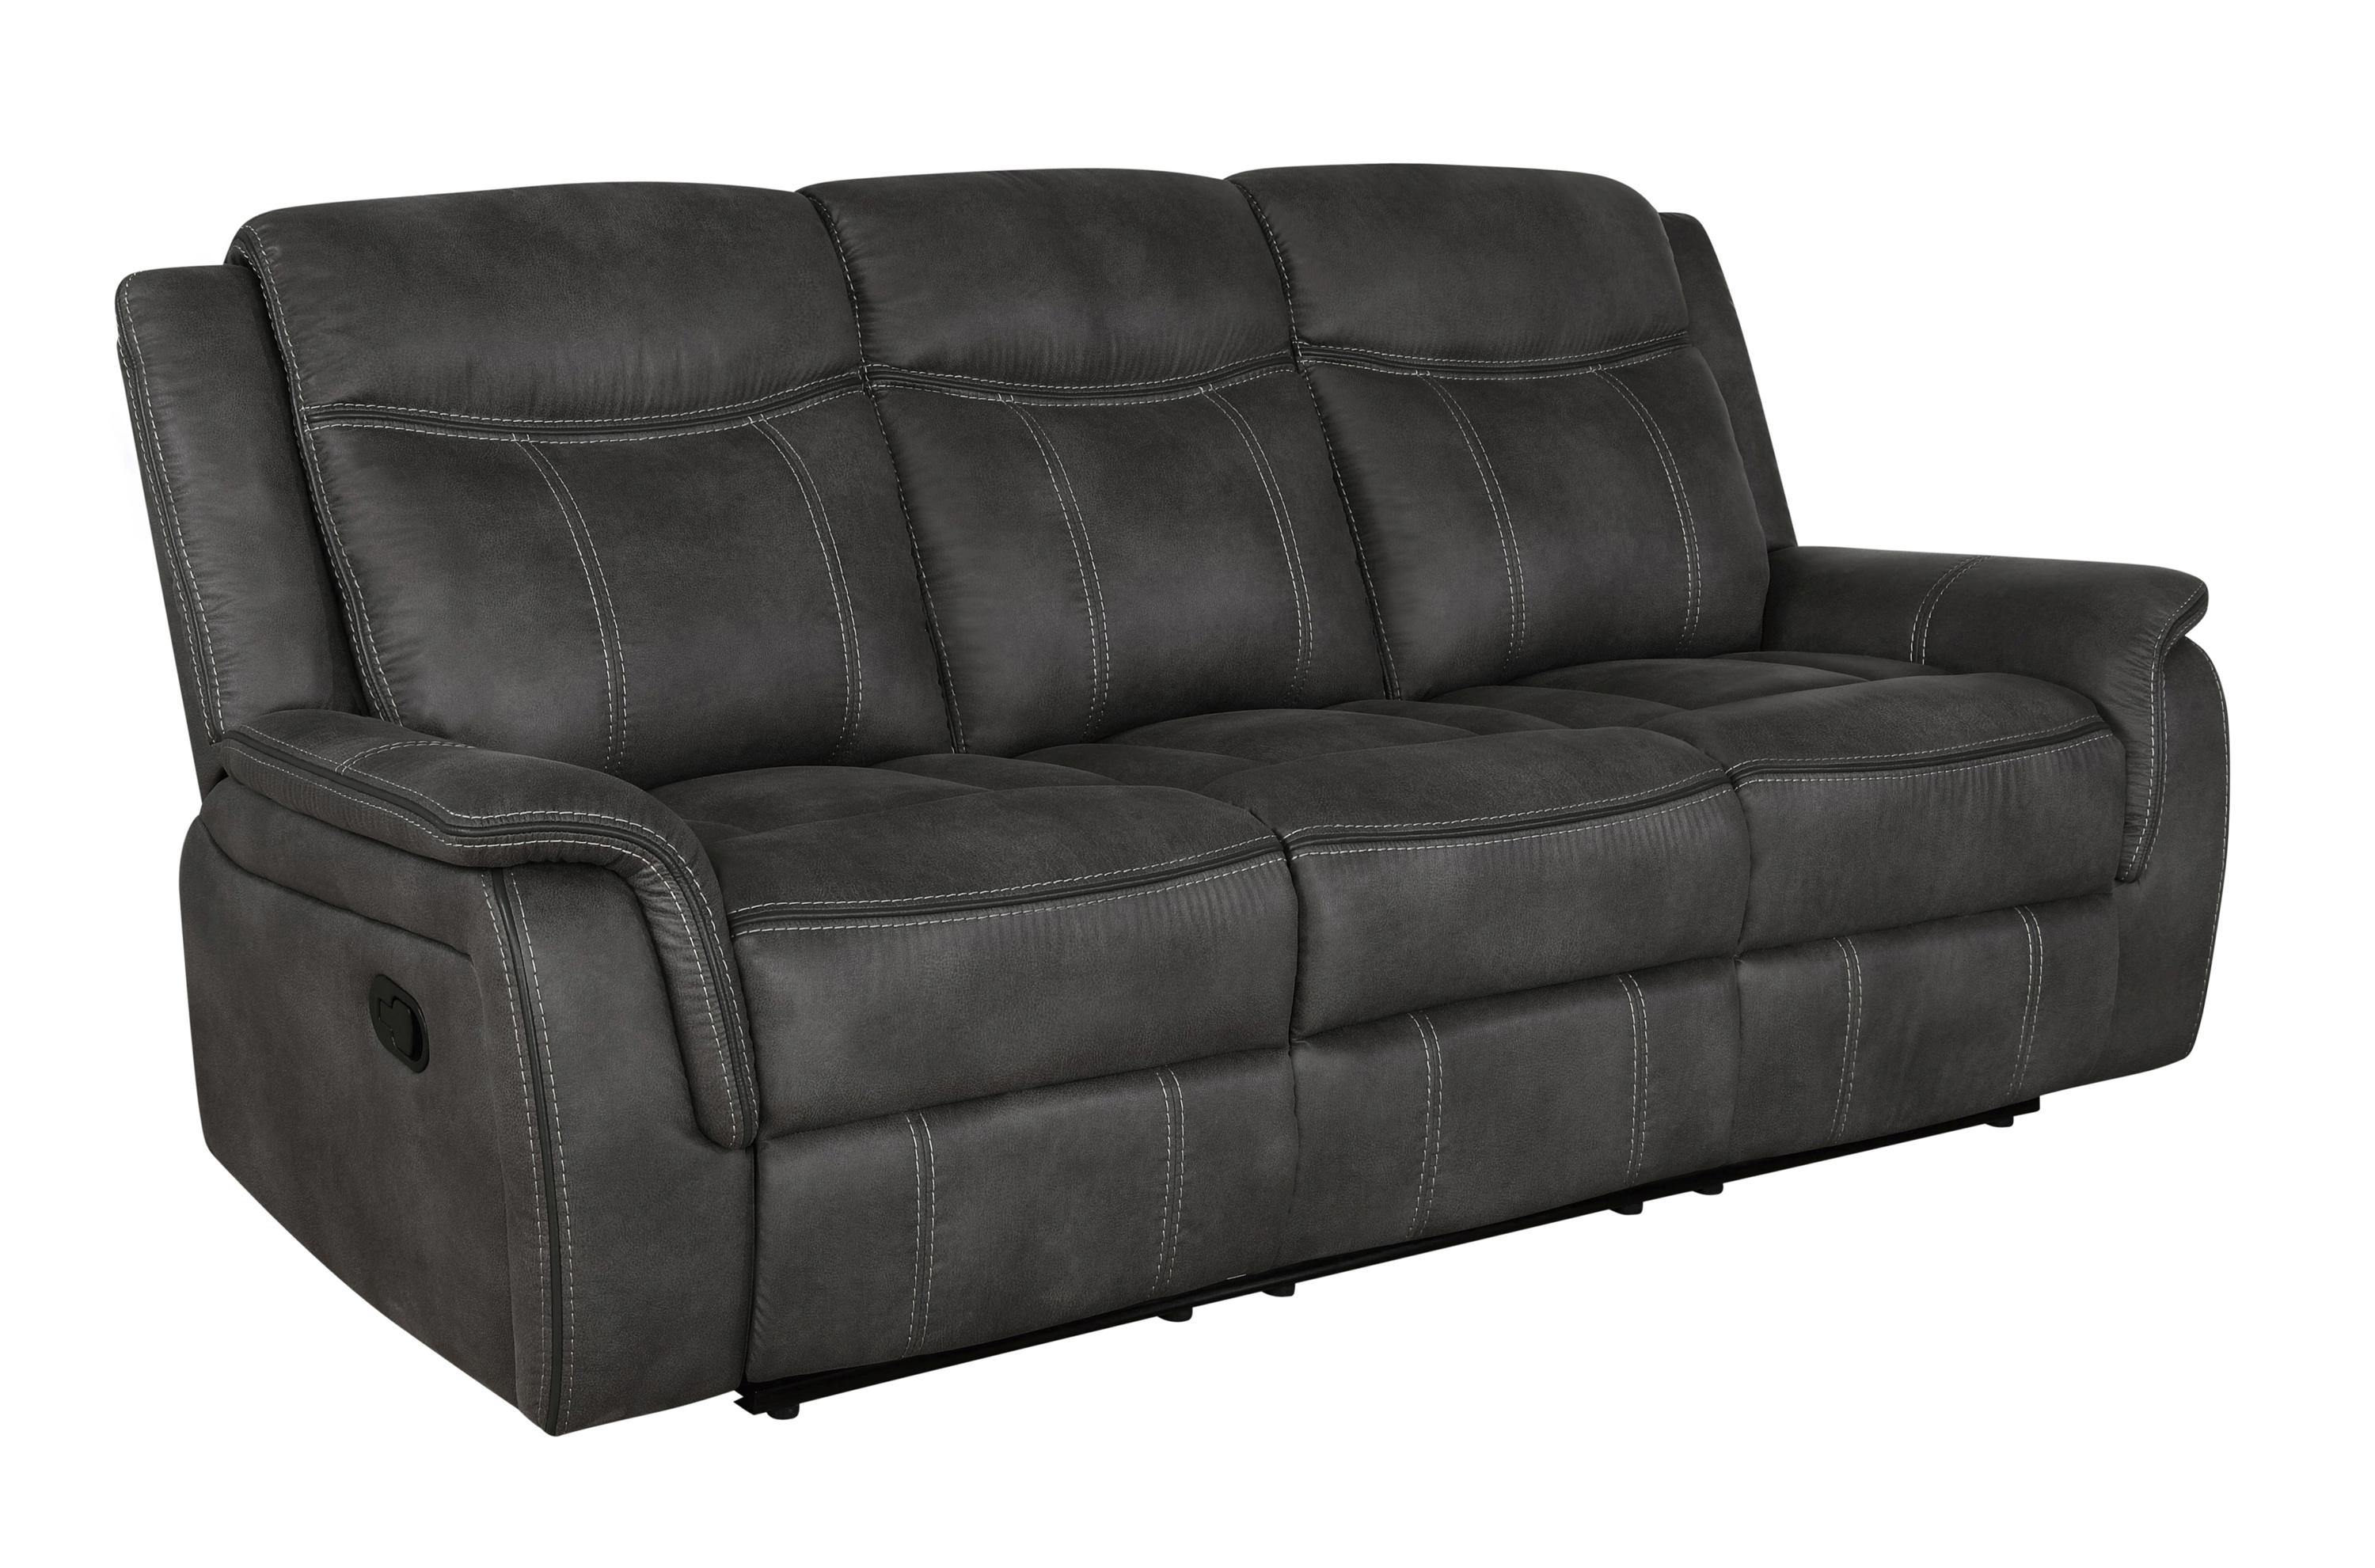 Transitional Motion Sofa 603504 Lawrence 603504 in Charcoal 